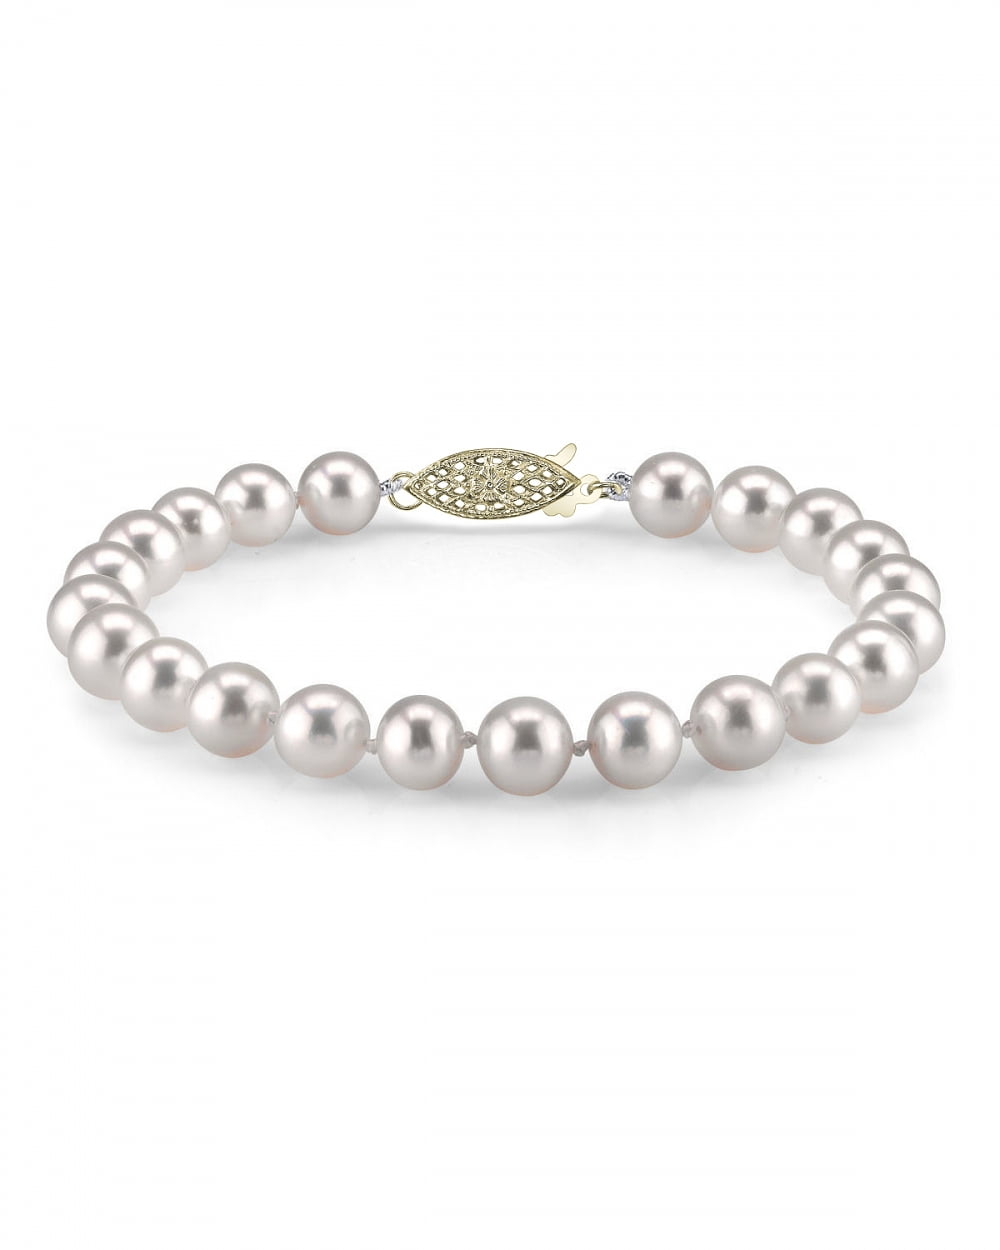 Genuine 14kt White Gold FW Cultured Pearl Bracelet 7.25 inches 